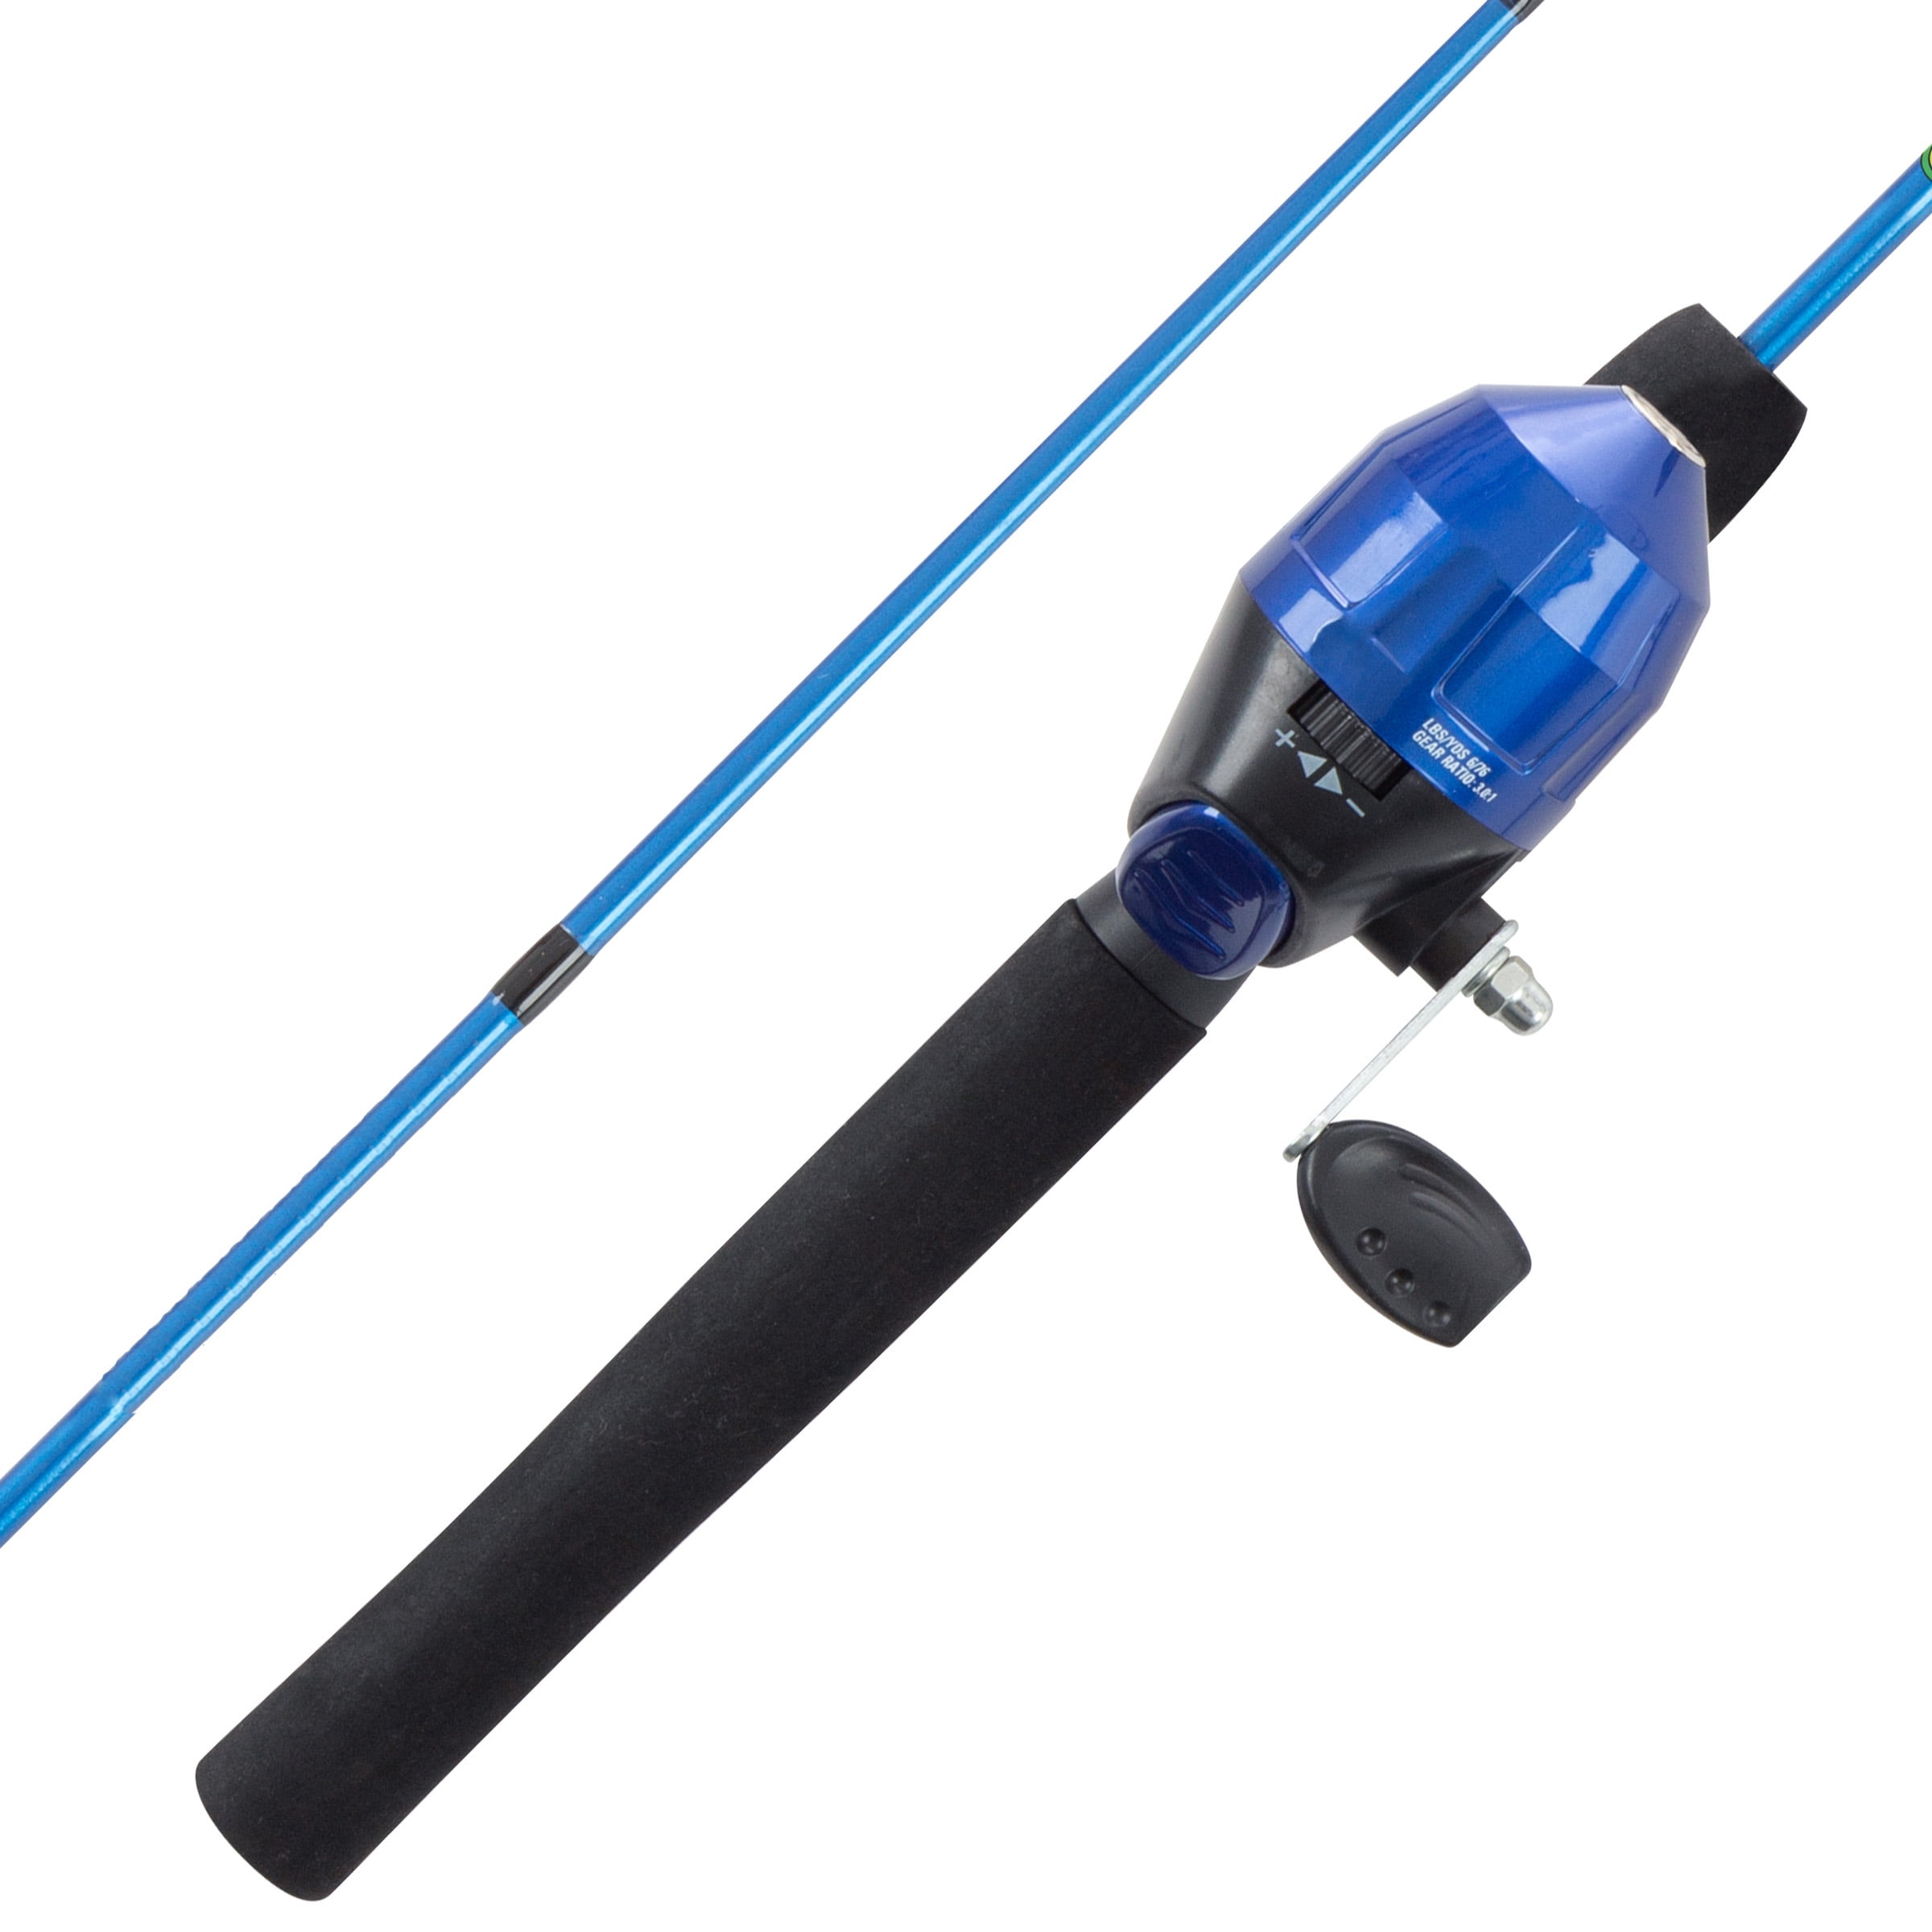 Kids Fishing Pole Reel Combos, Ultralight Telescopic 1.2m/4ft Fishing Rod + Spinning Reel + Spincast Baits + Fishing Line with Portable Tackle Box for